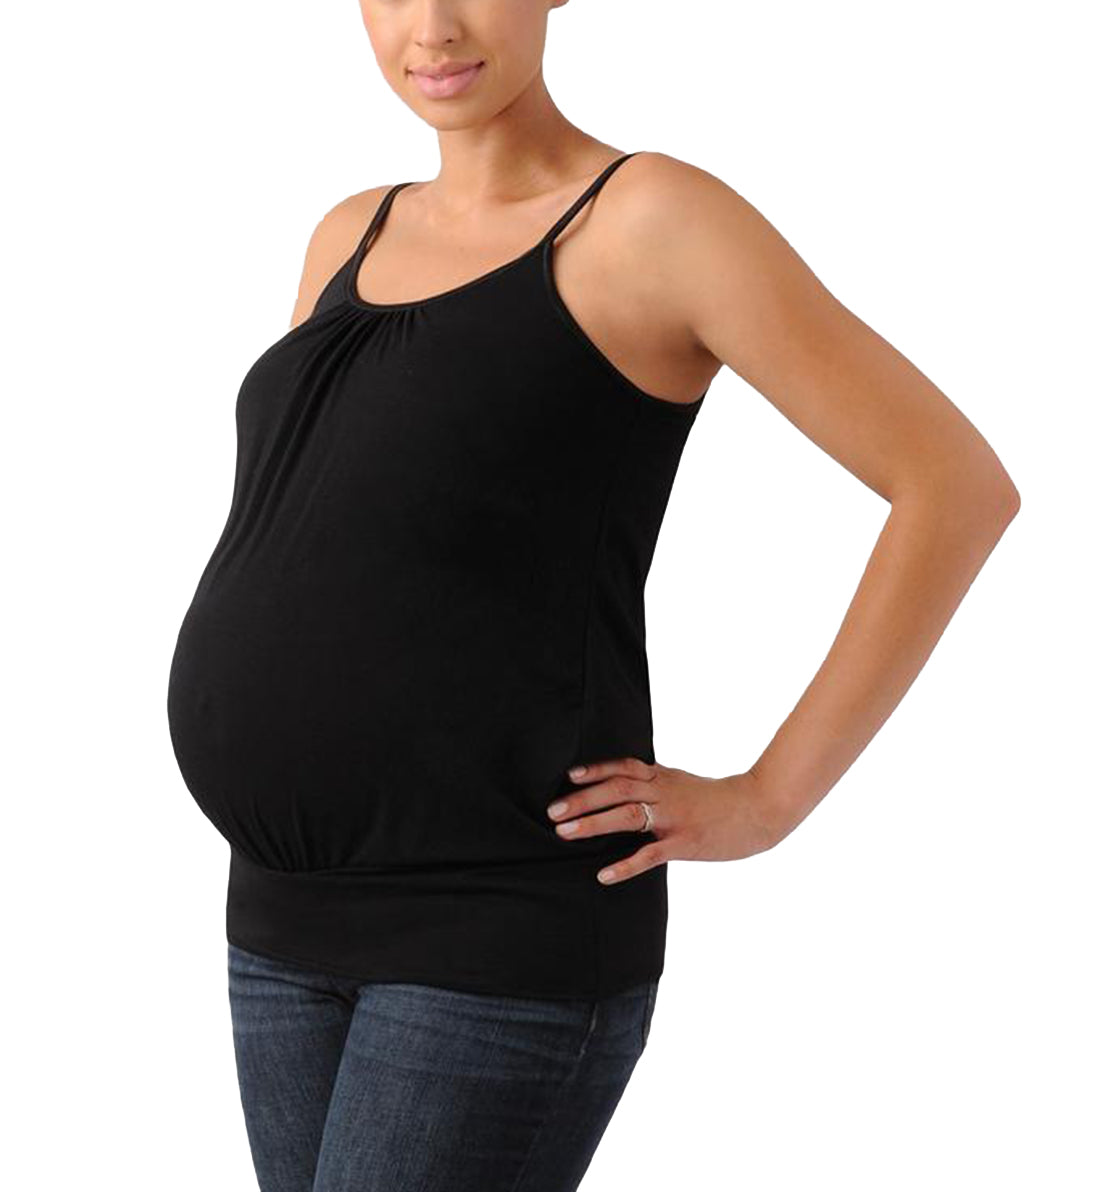 Belly Bandit BEFORE DURING &amp; AFTER TANK (BDAT),Small,Black - Black,Small